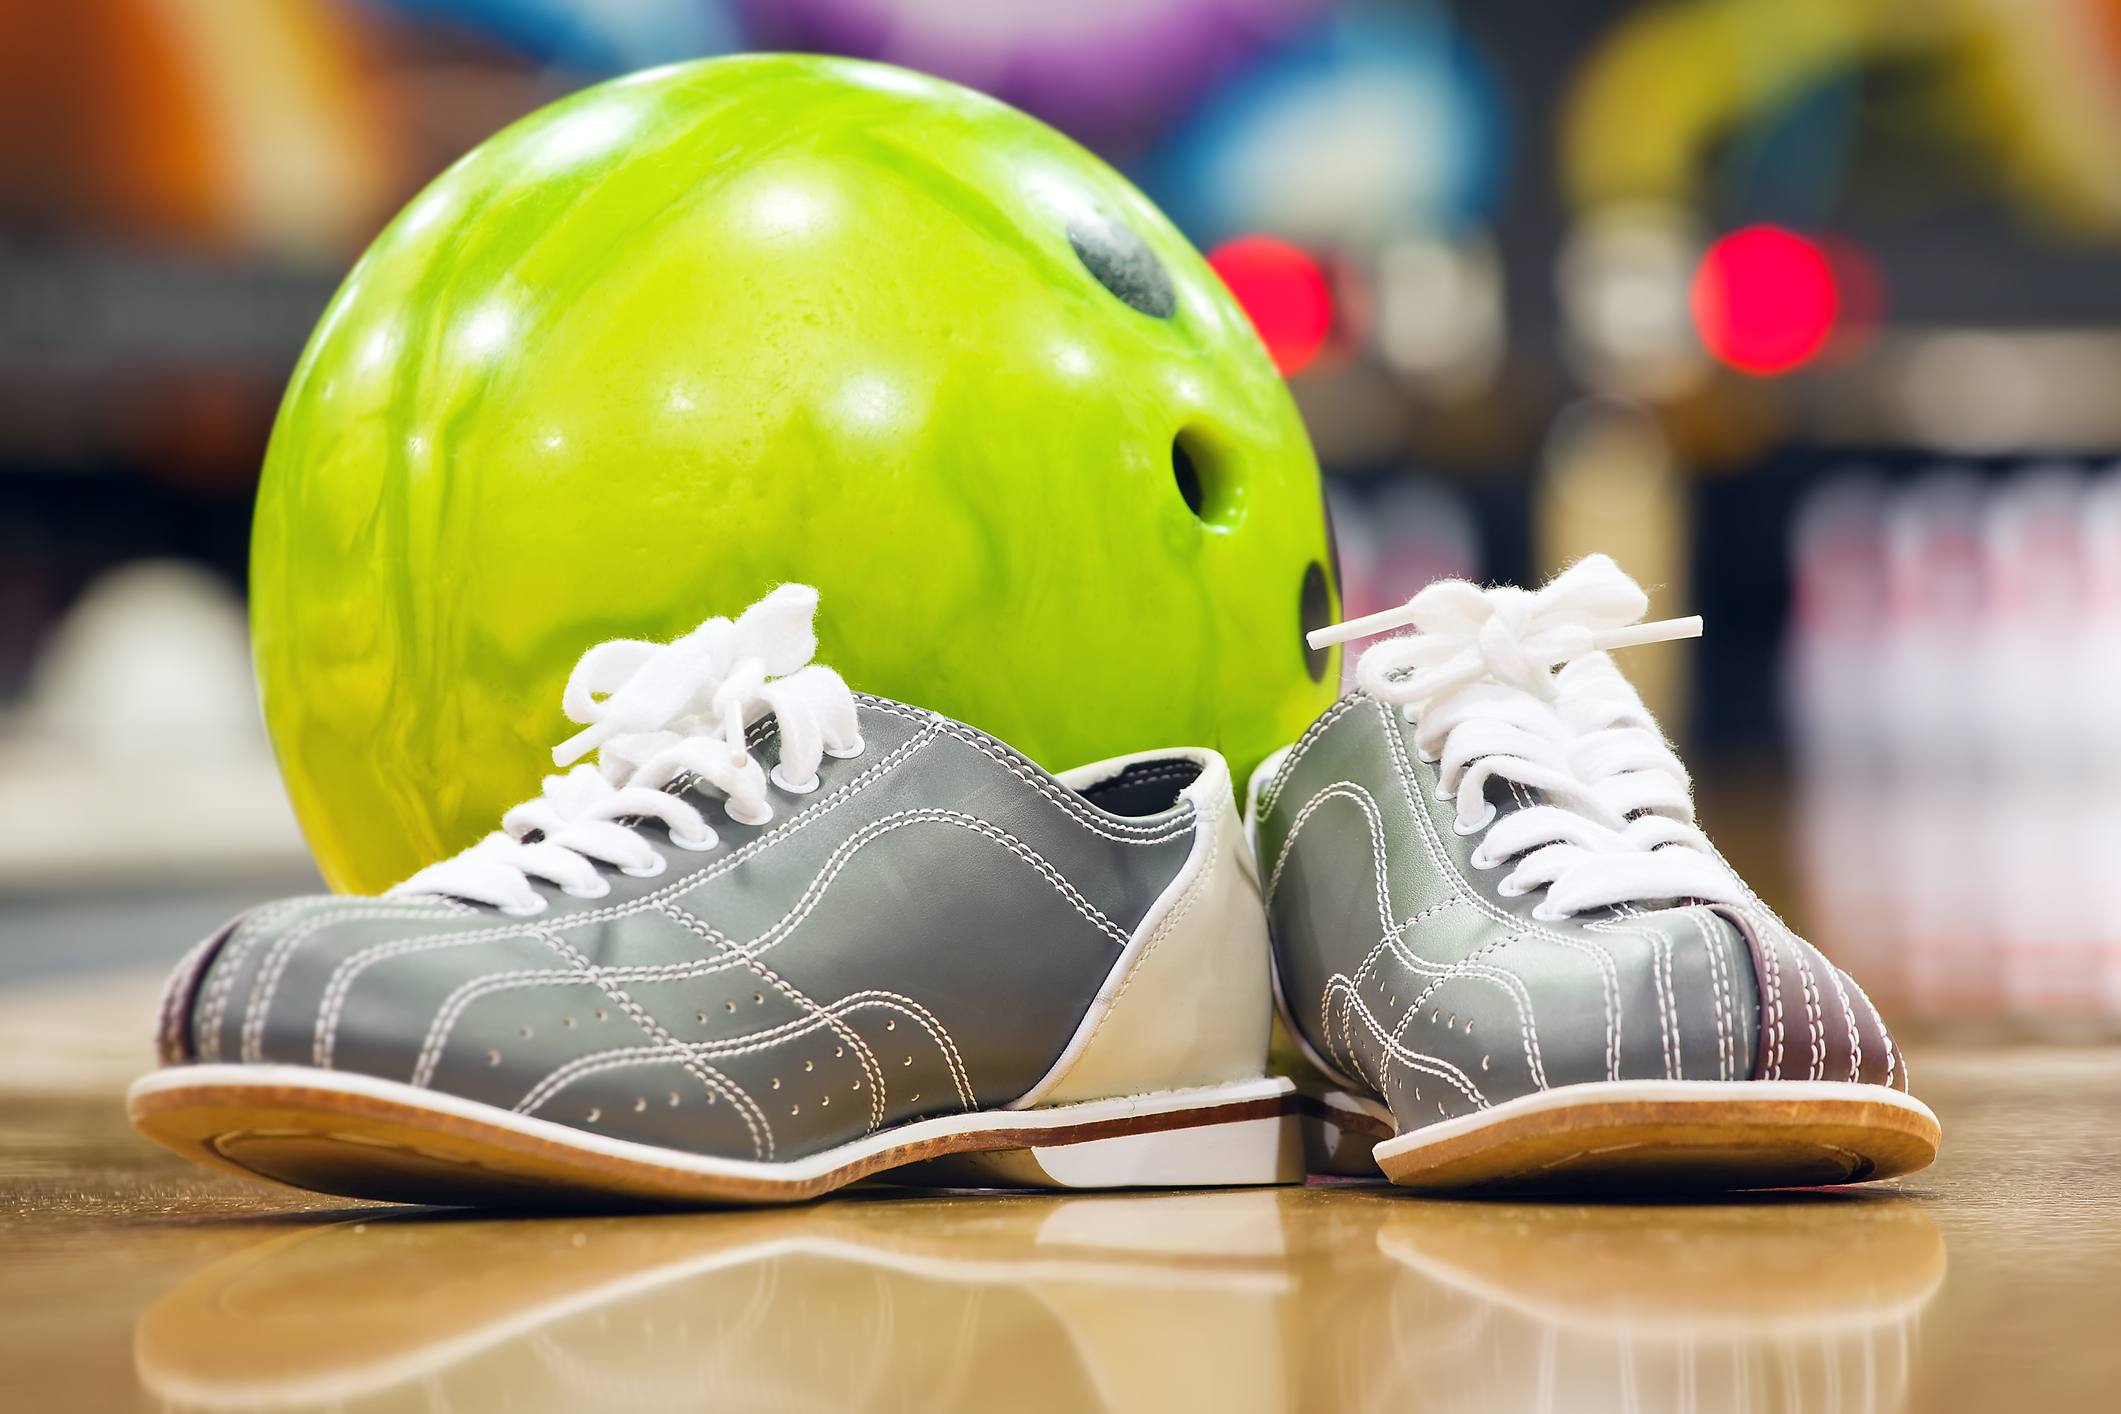 Close-up of bowling shoes and neon green ball 